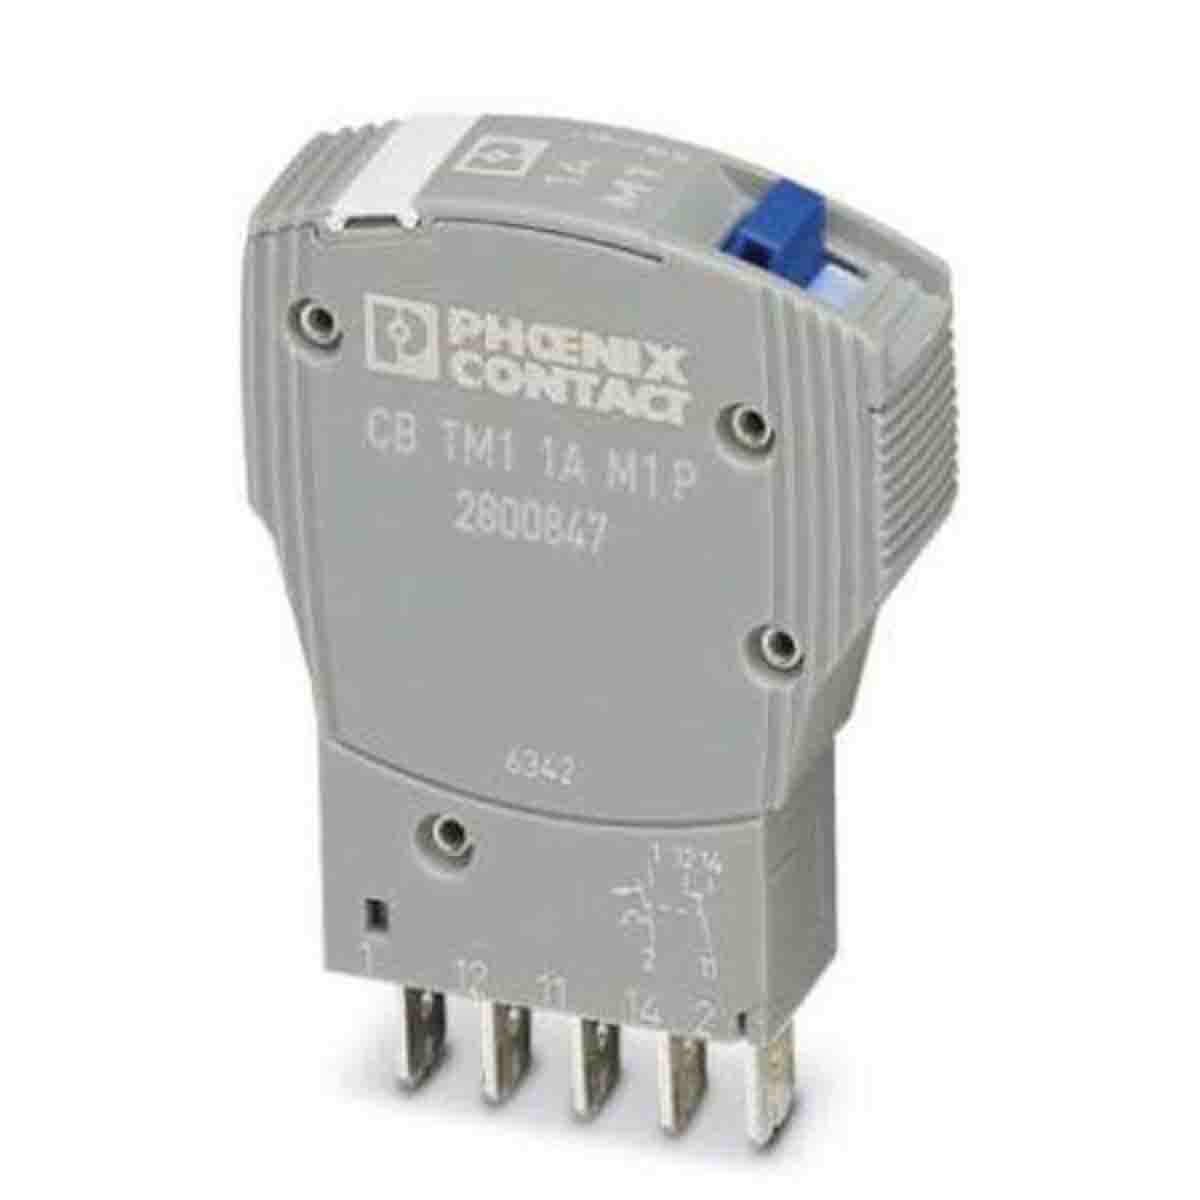 Phoenix Contact CB TM1  Single Pole Thermal Circuit Breaker - 50V dc Voltage Rating, 1A Current Rating